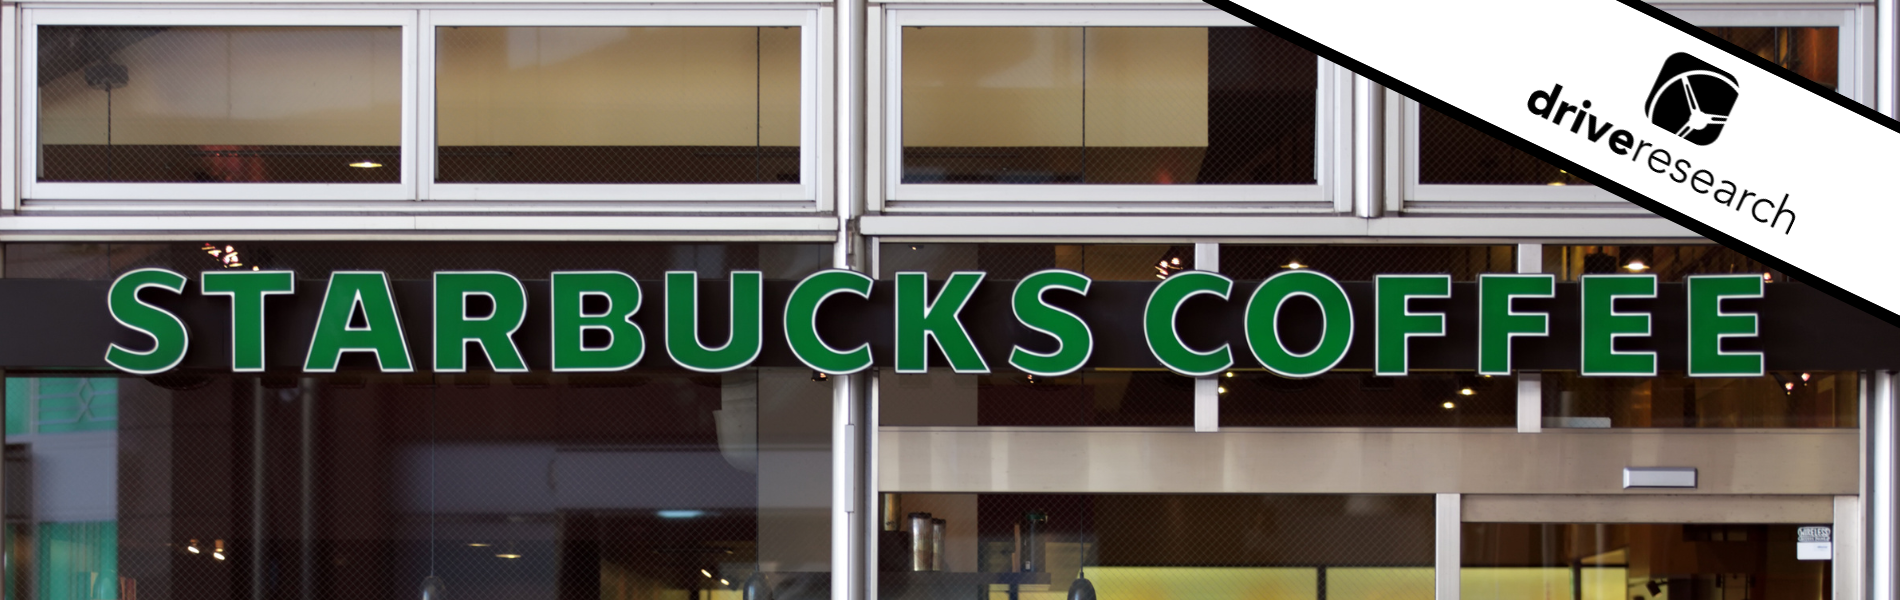 Starbucks Market Research Strategy: What It Is & Why It Works